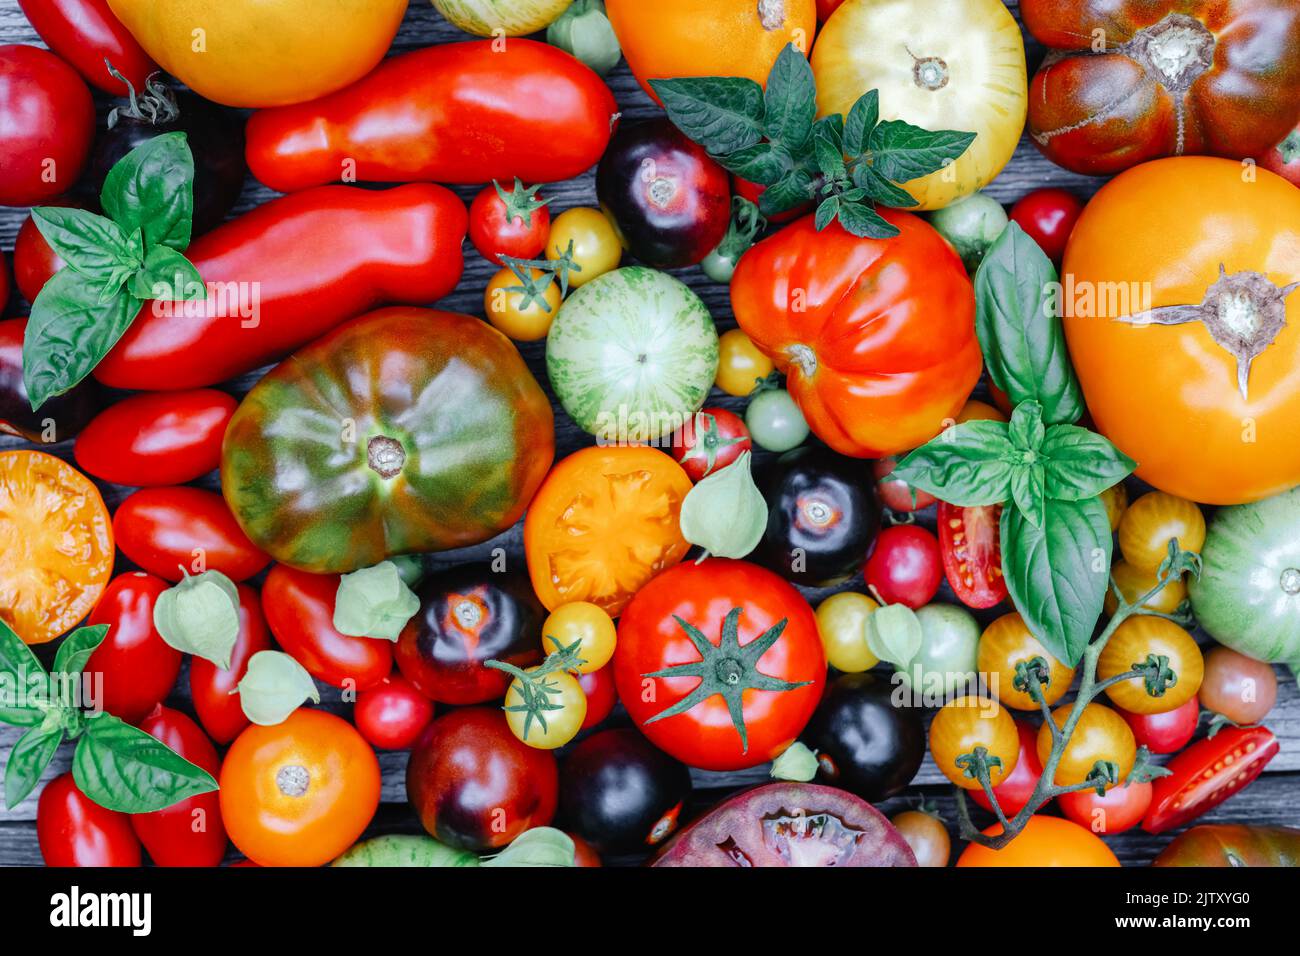 Different varieties kind of red, yellow, green and black tomato mix. Fresh assorted colorful summer tomatoes background, close up. Food photography Stock Photo